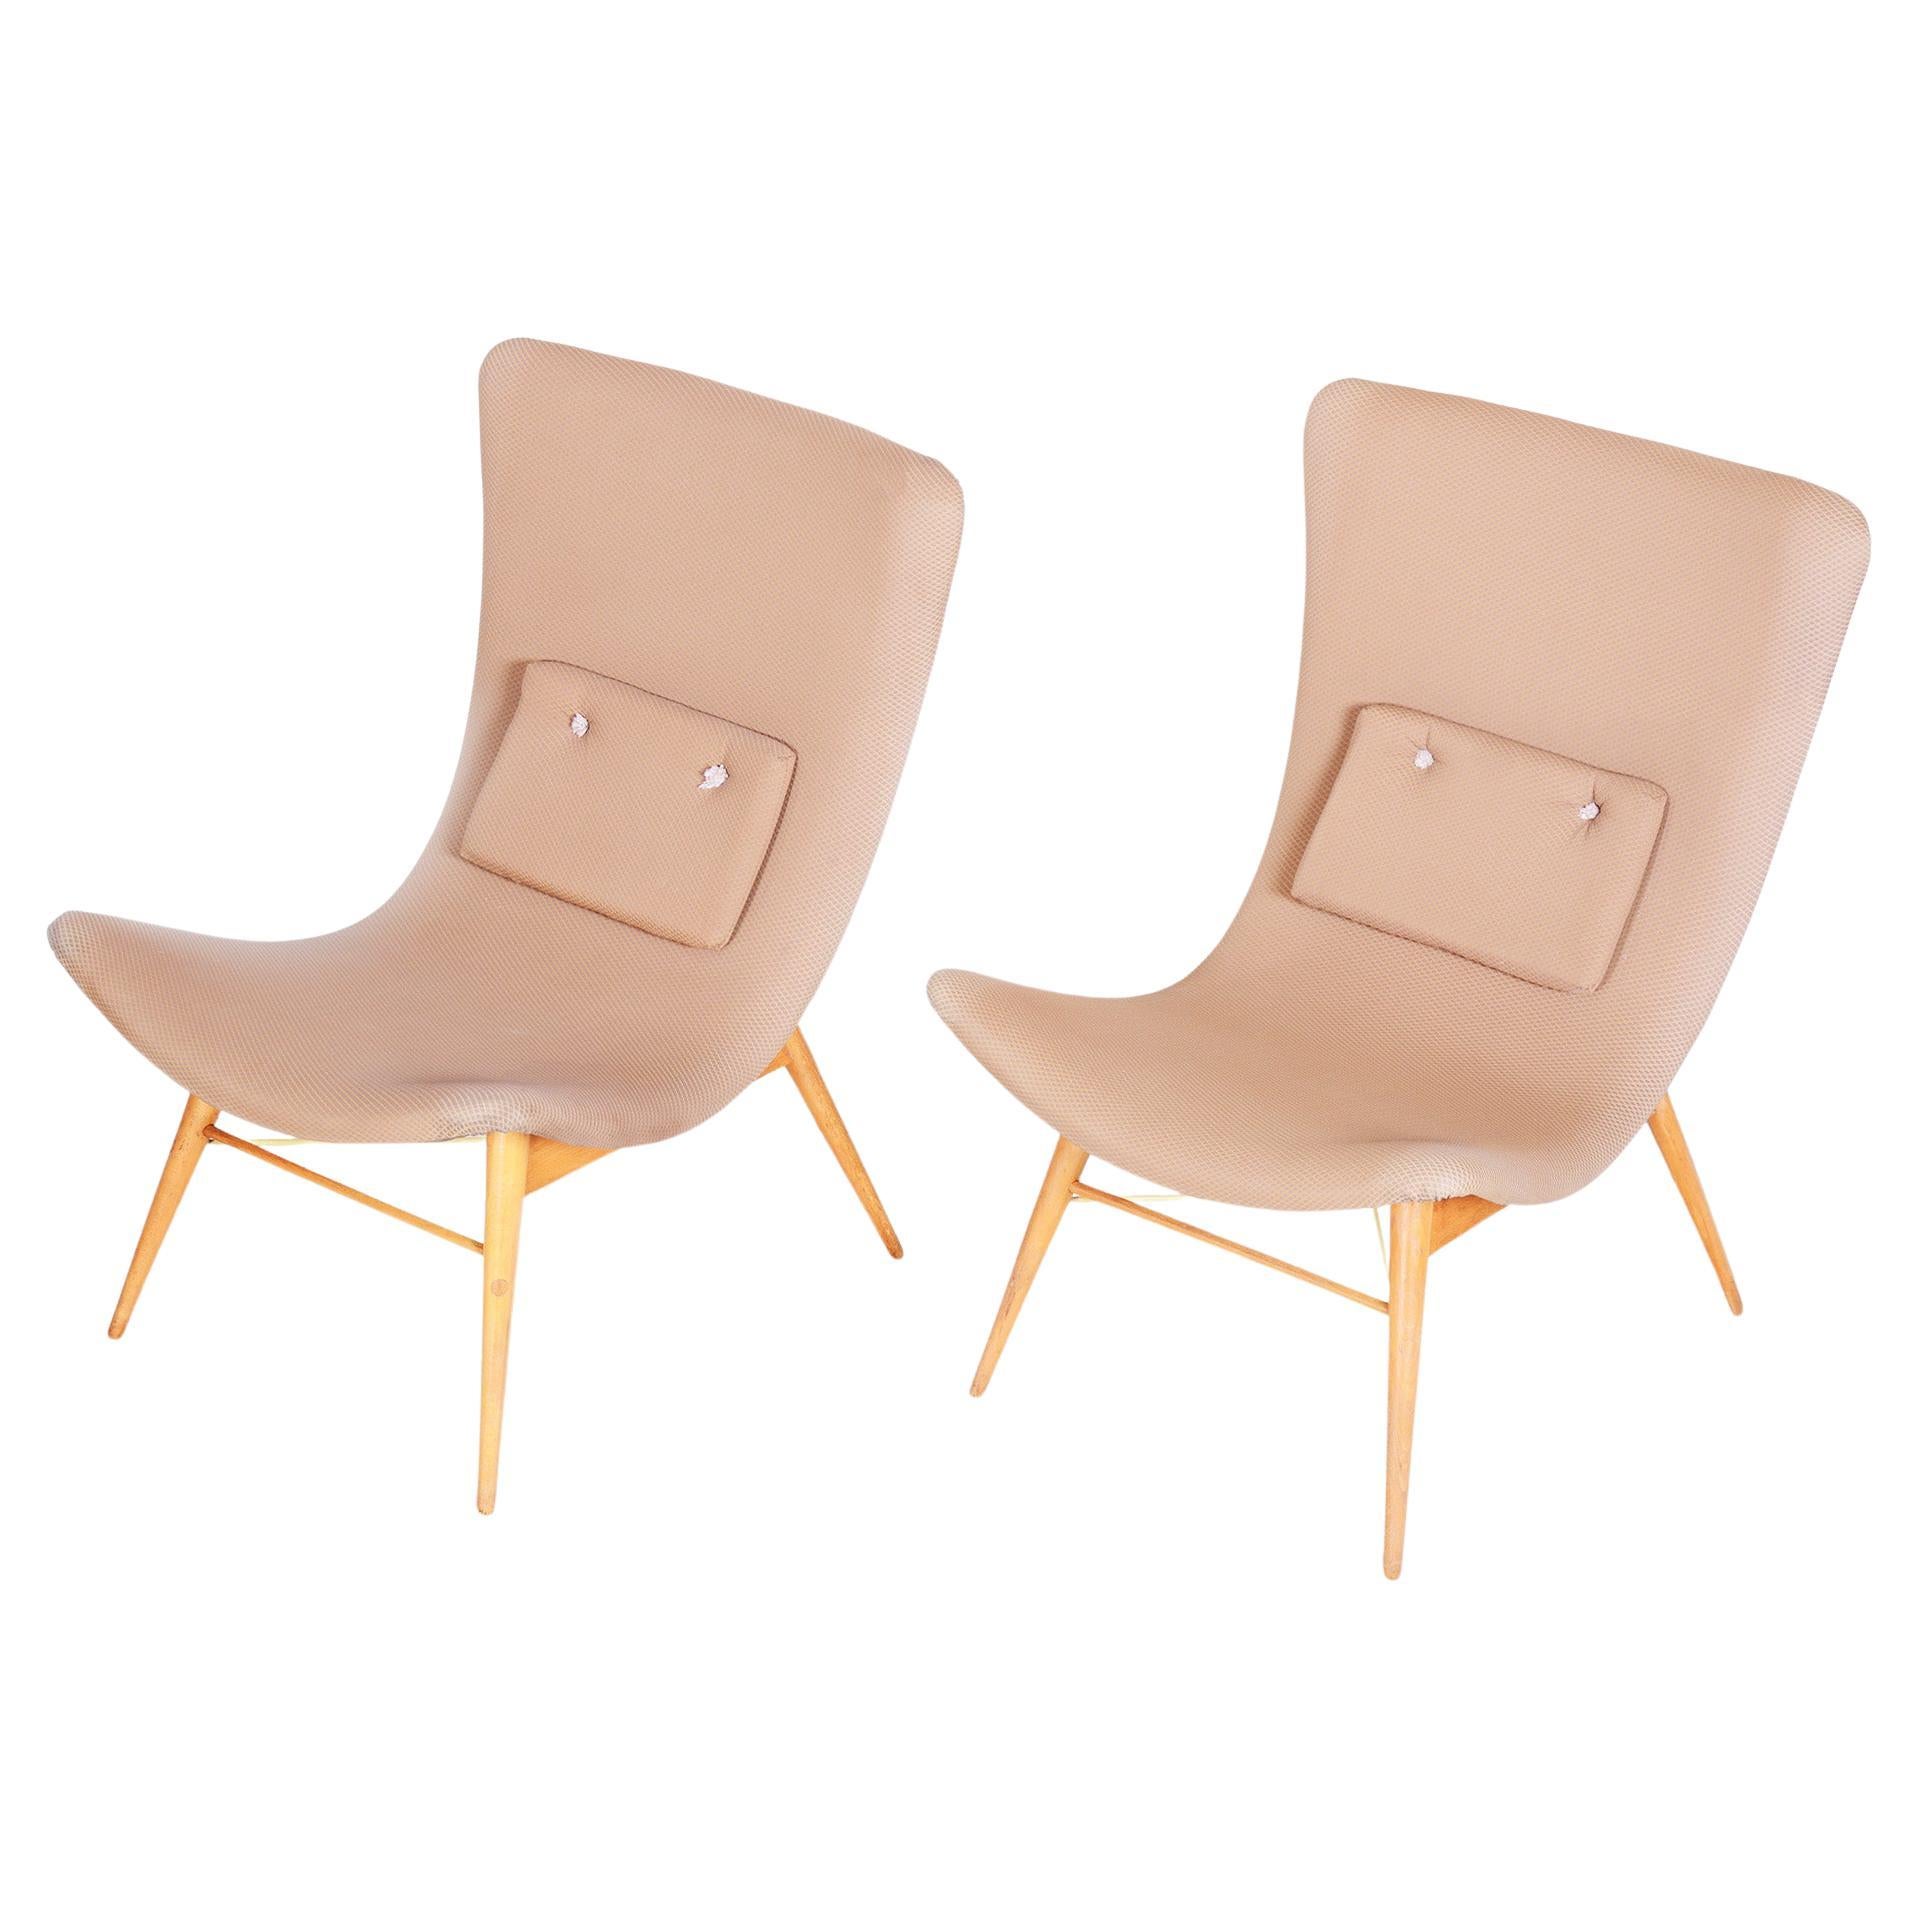 Set of Two Mid Century Armchairs Made in 1950s Czechia, Original Condition For Sale